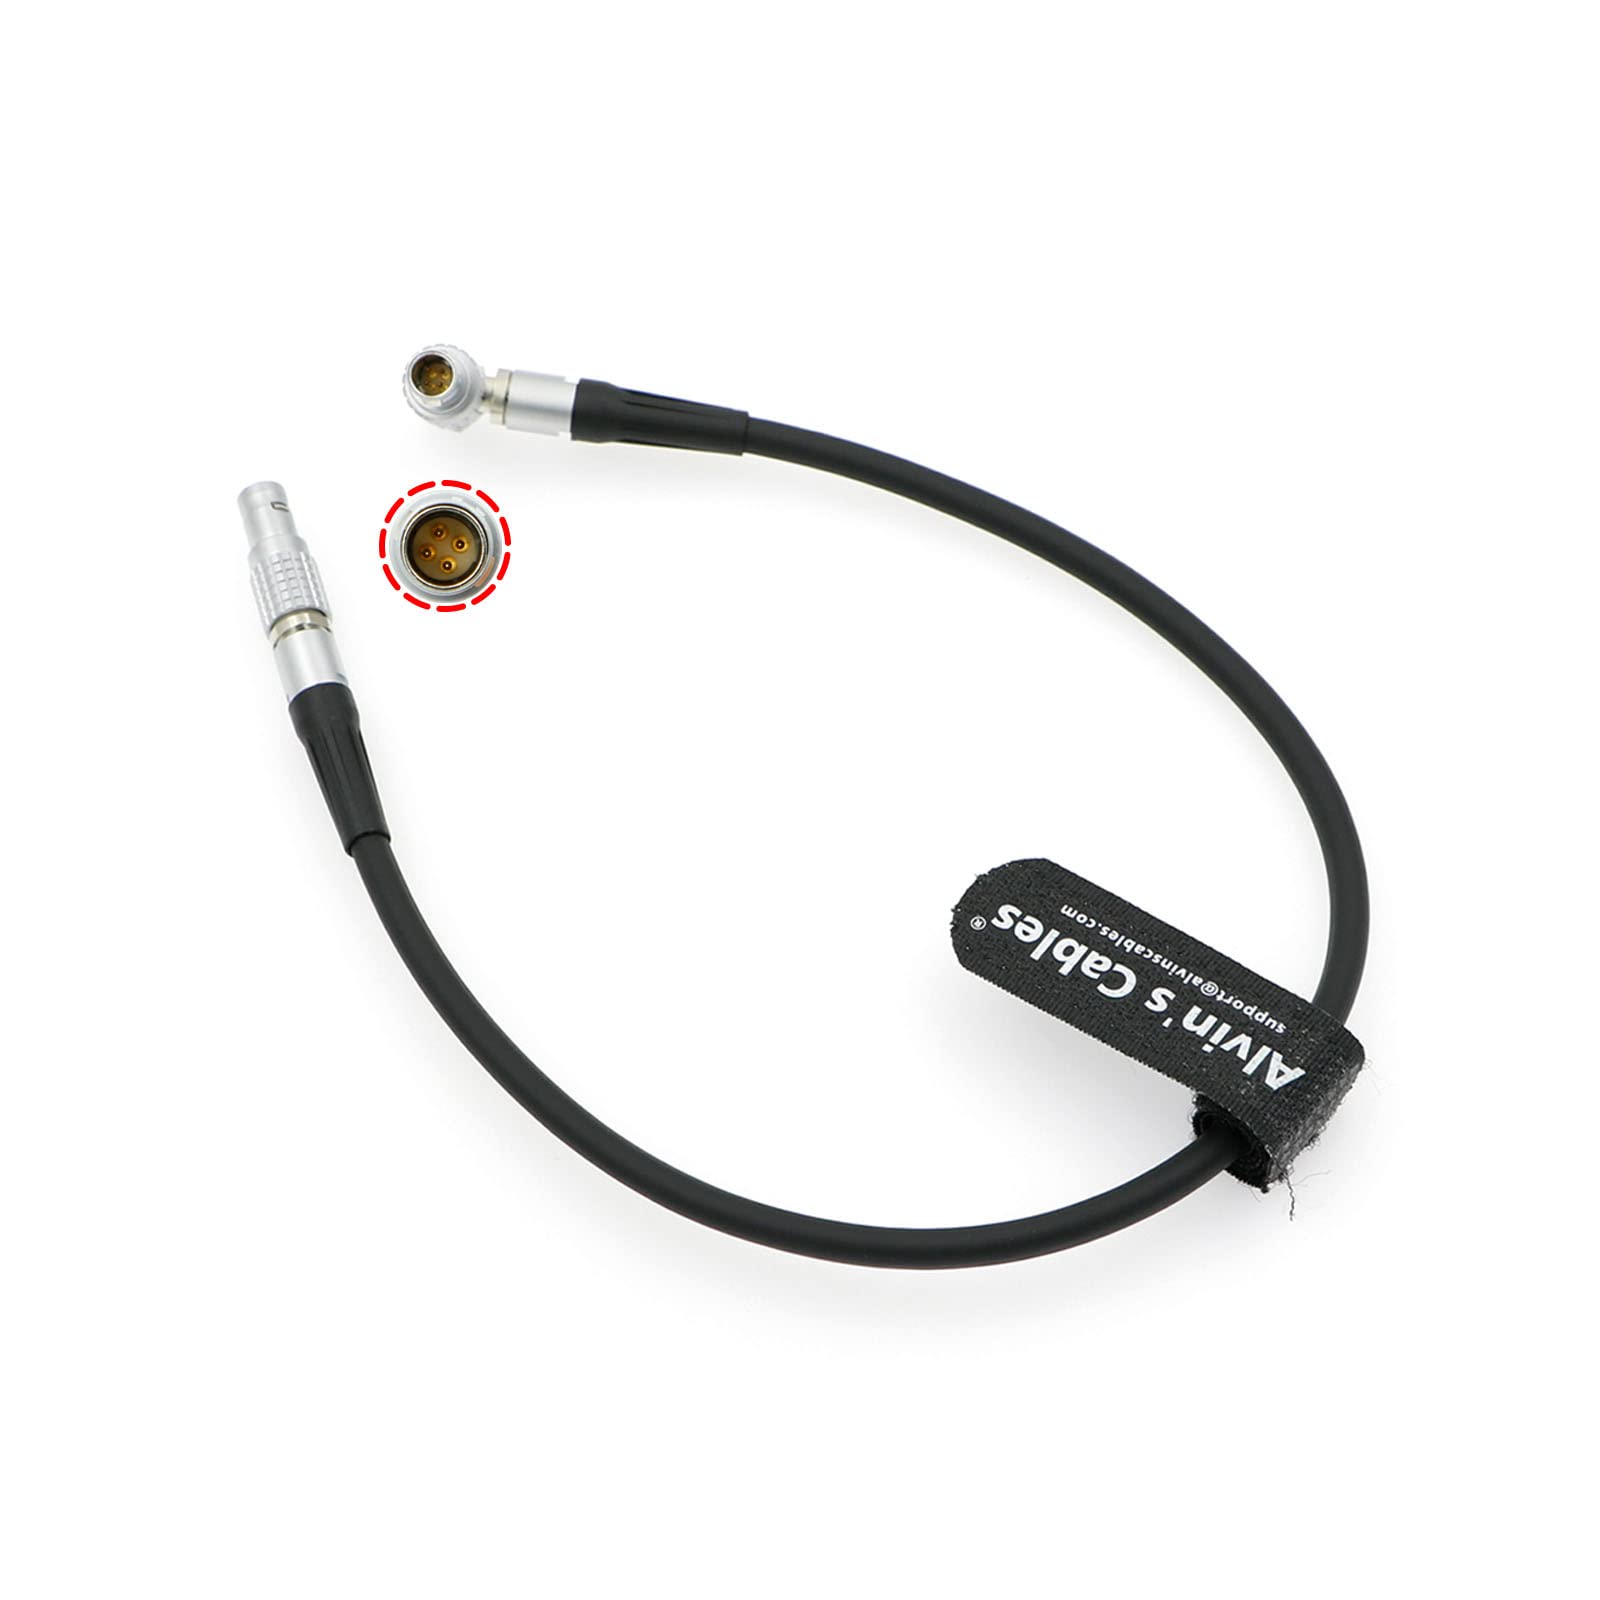 UDM-Sensor-Cable for ARRI UDM-1 Sensor Unit and Display Unit 4 Pin to Right Angle 4 Pin Cable Compatible with # K2.0006459 Alvin’s Cables